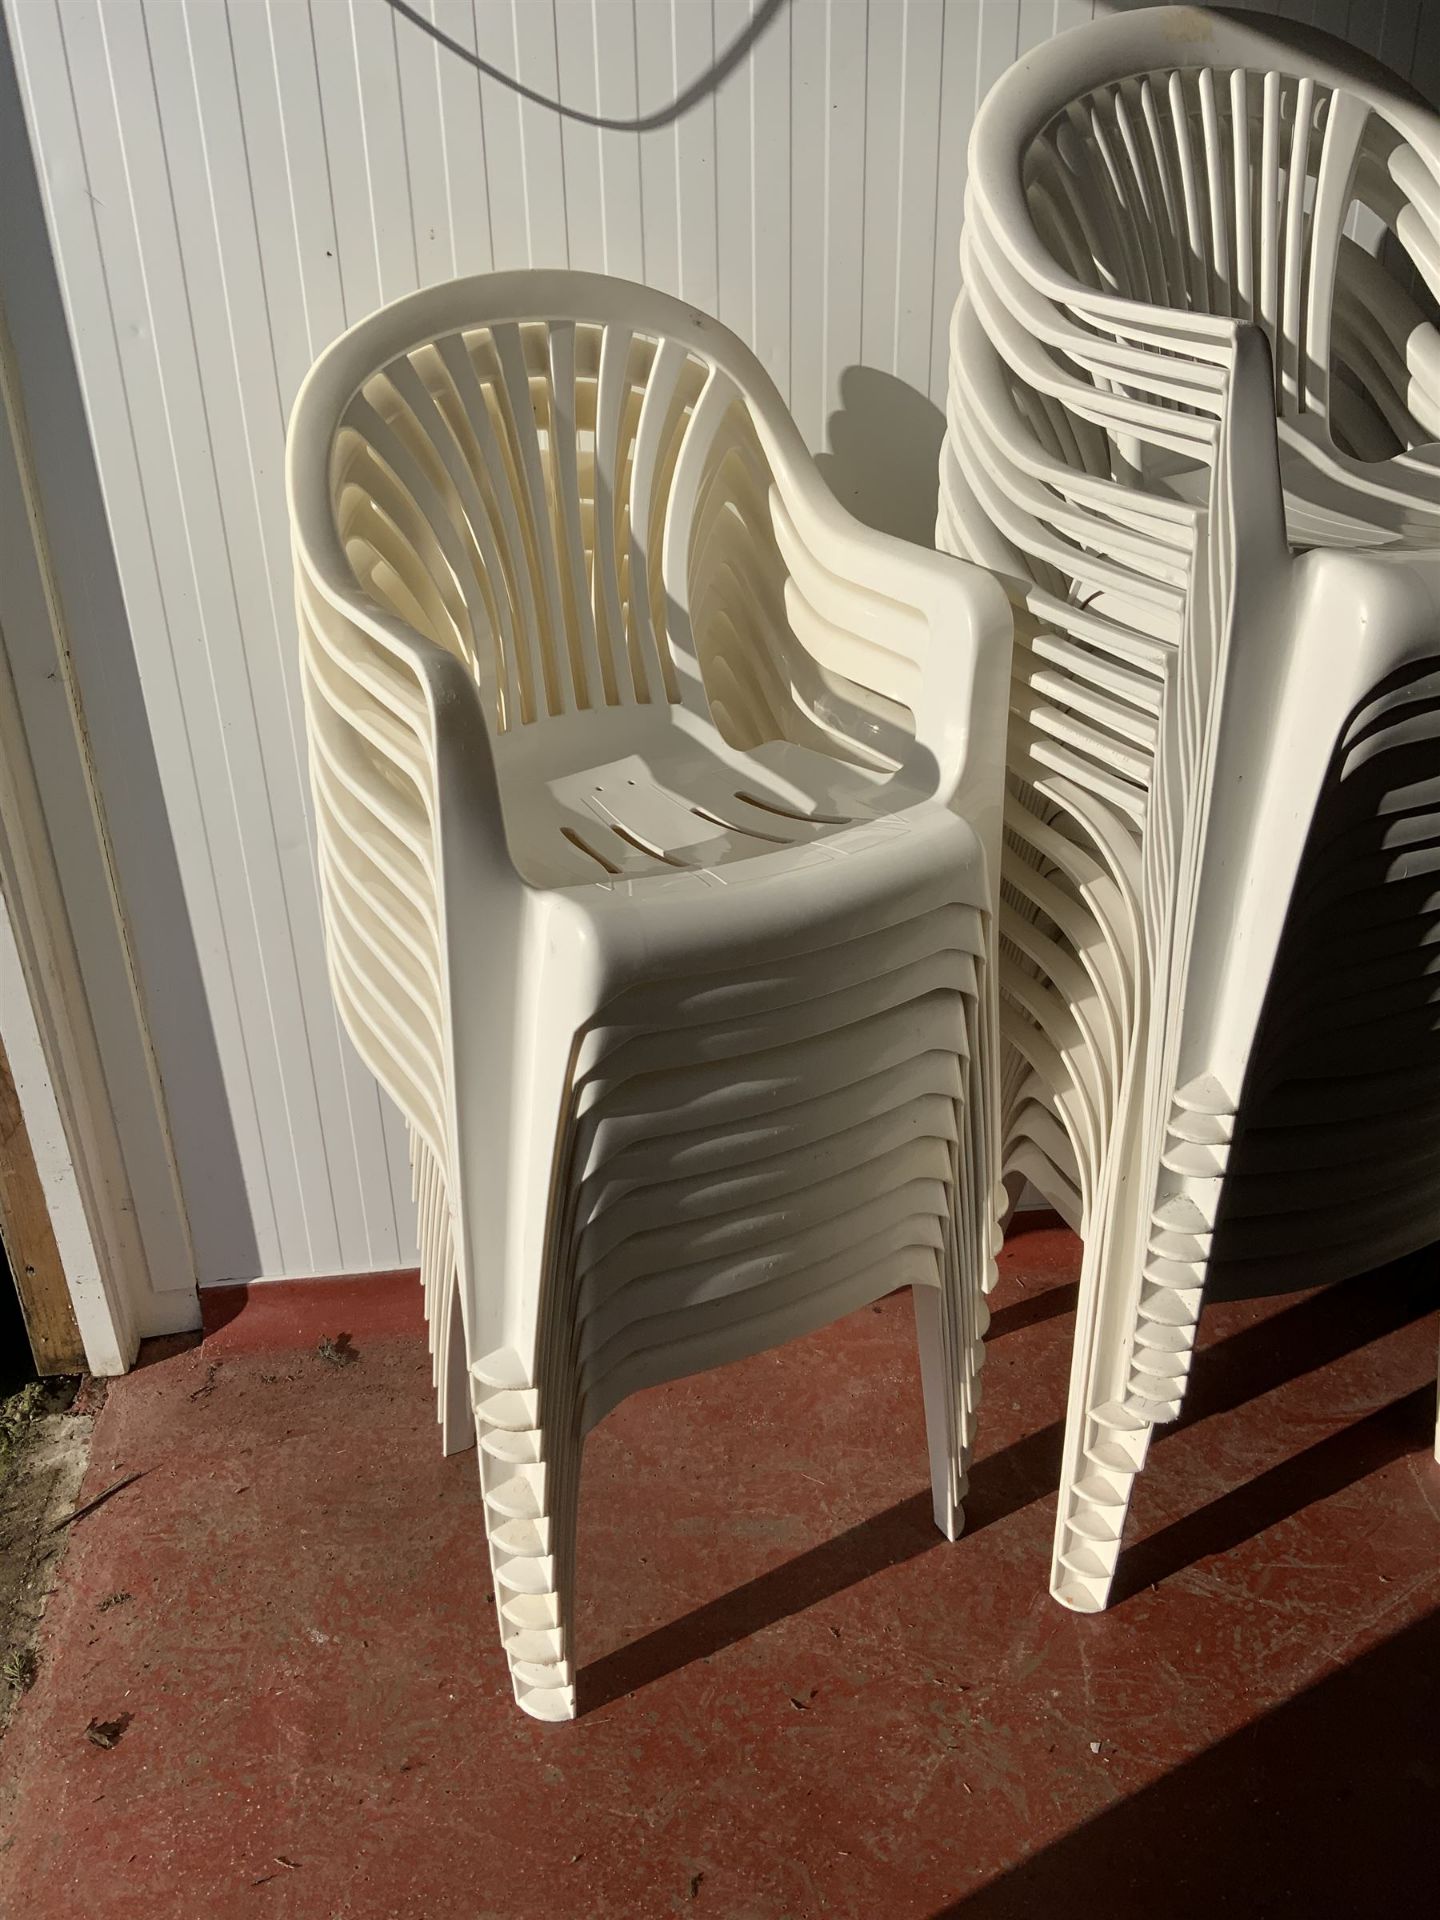 27 White plastic stacking chairs and 15 charcoal stacking chairs - Image 2 of 7